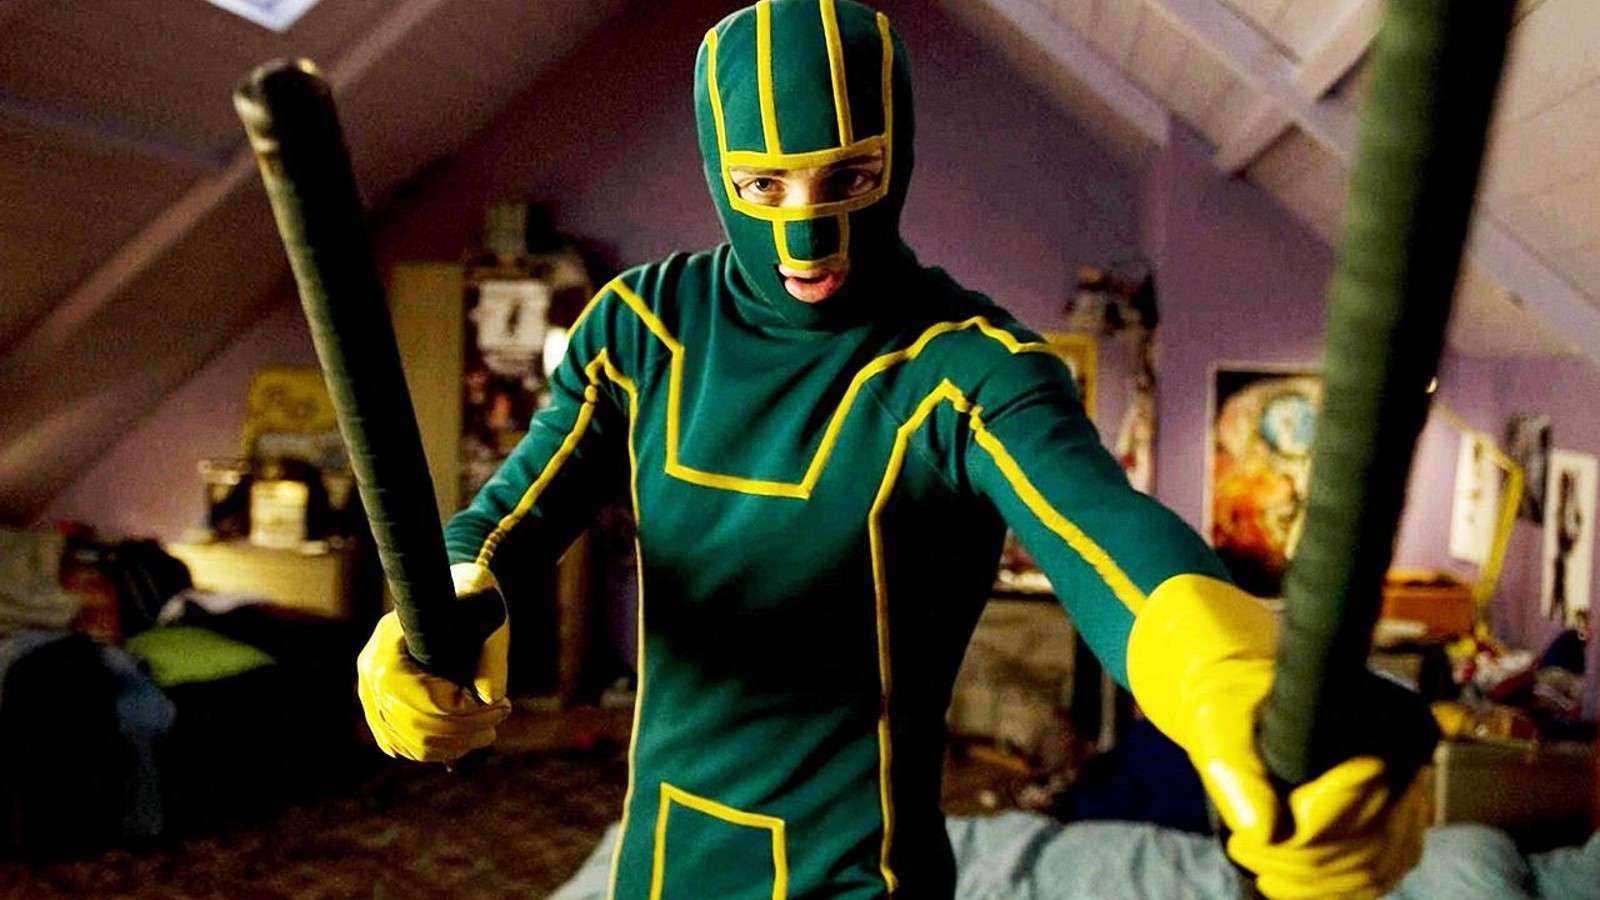 Aaron Taylor-Johnson in the Kick-Ass outfit.